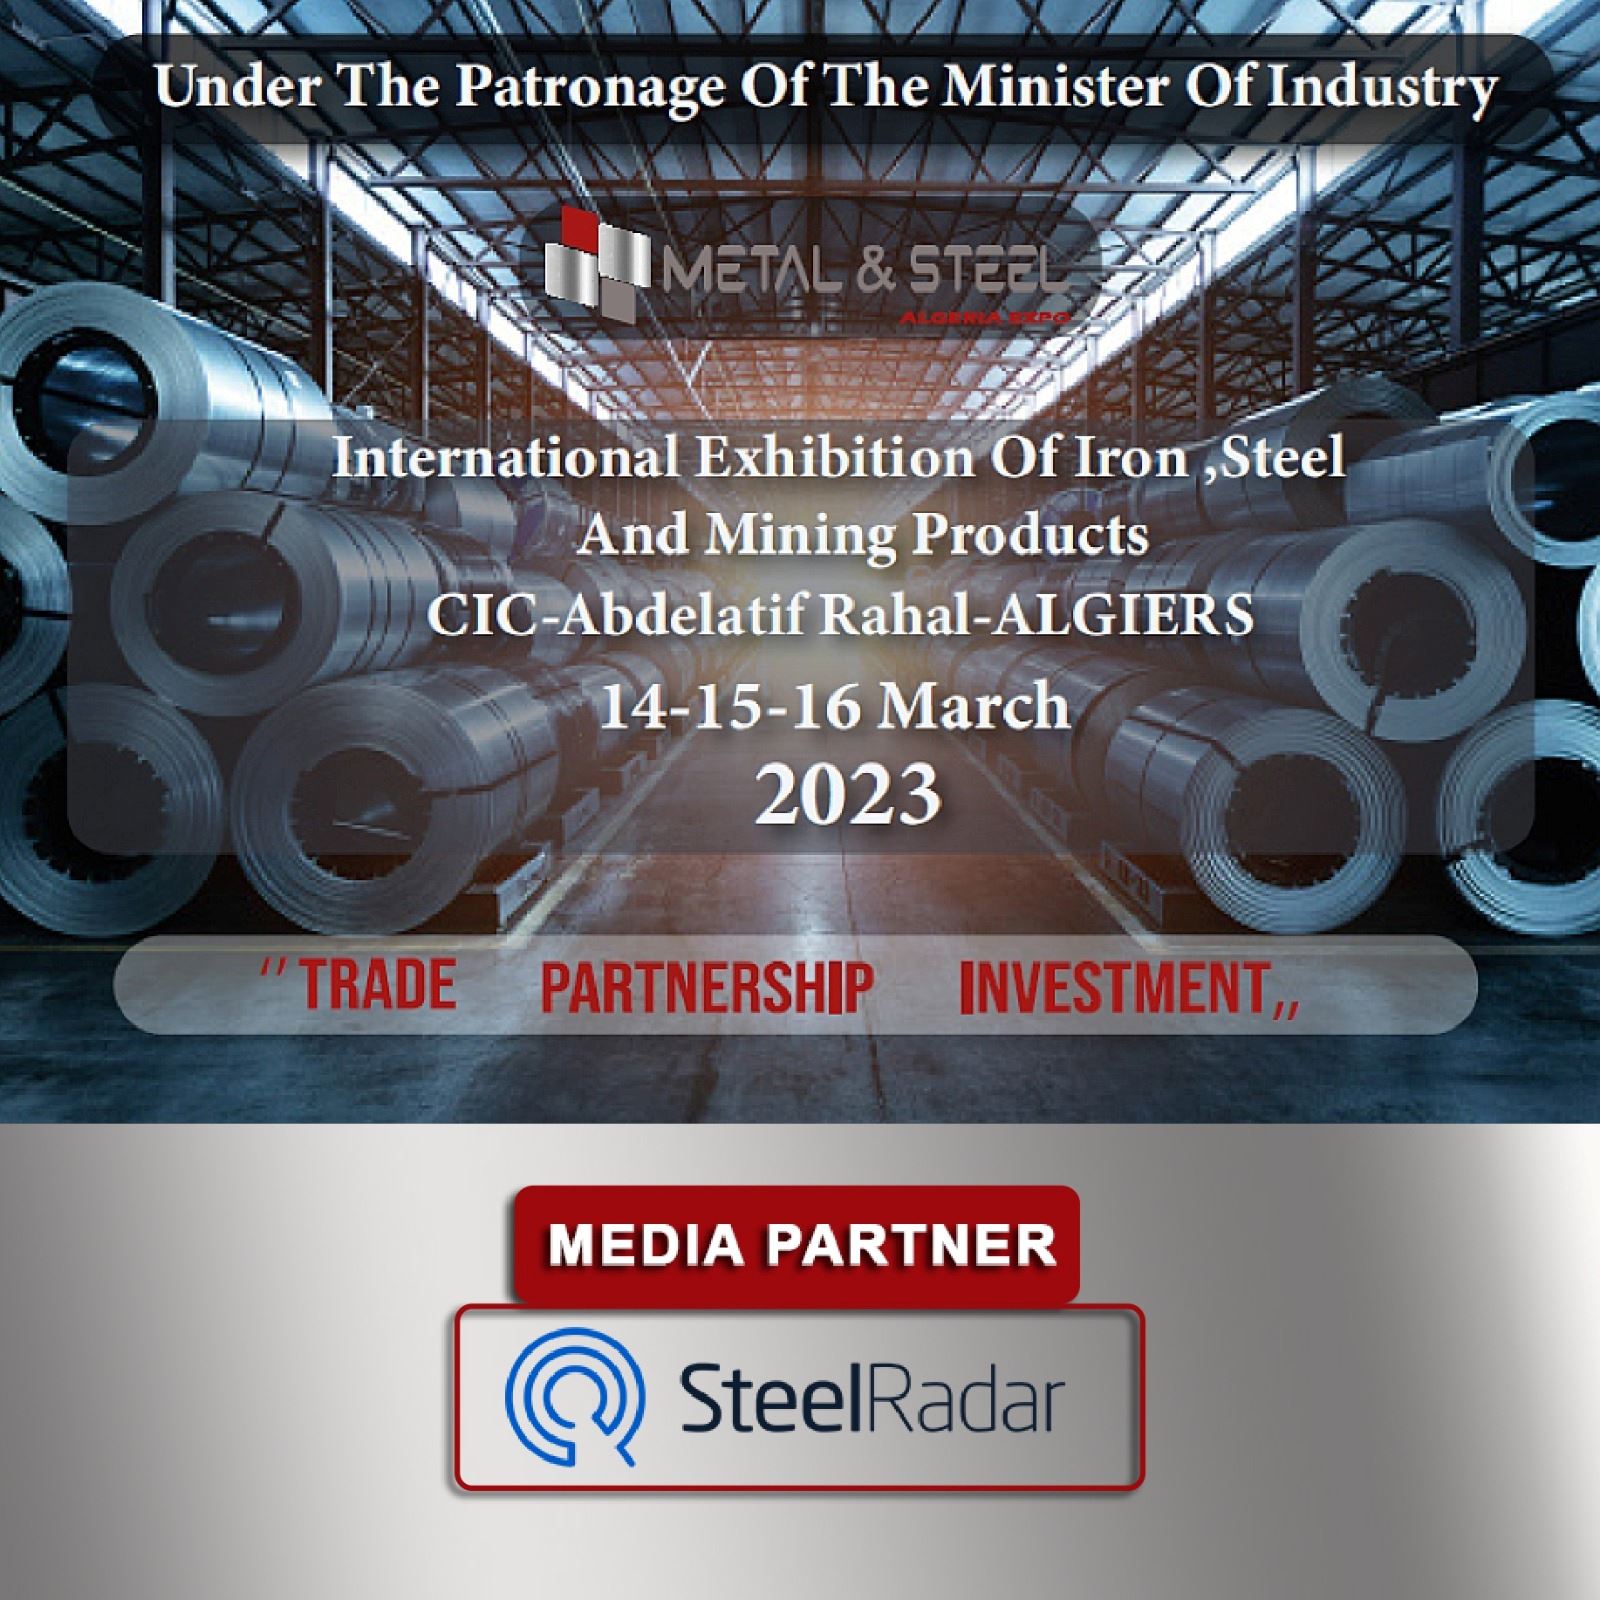 Stall Expo Event organizes the International Iron, Steel and Mining Products Exhibition